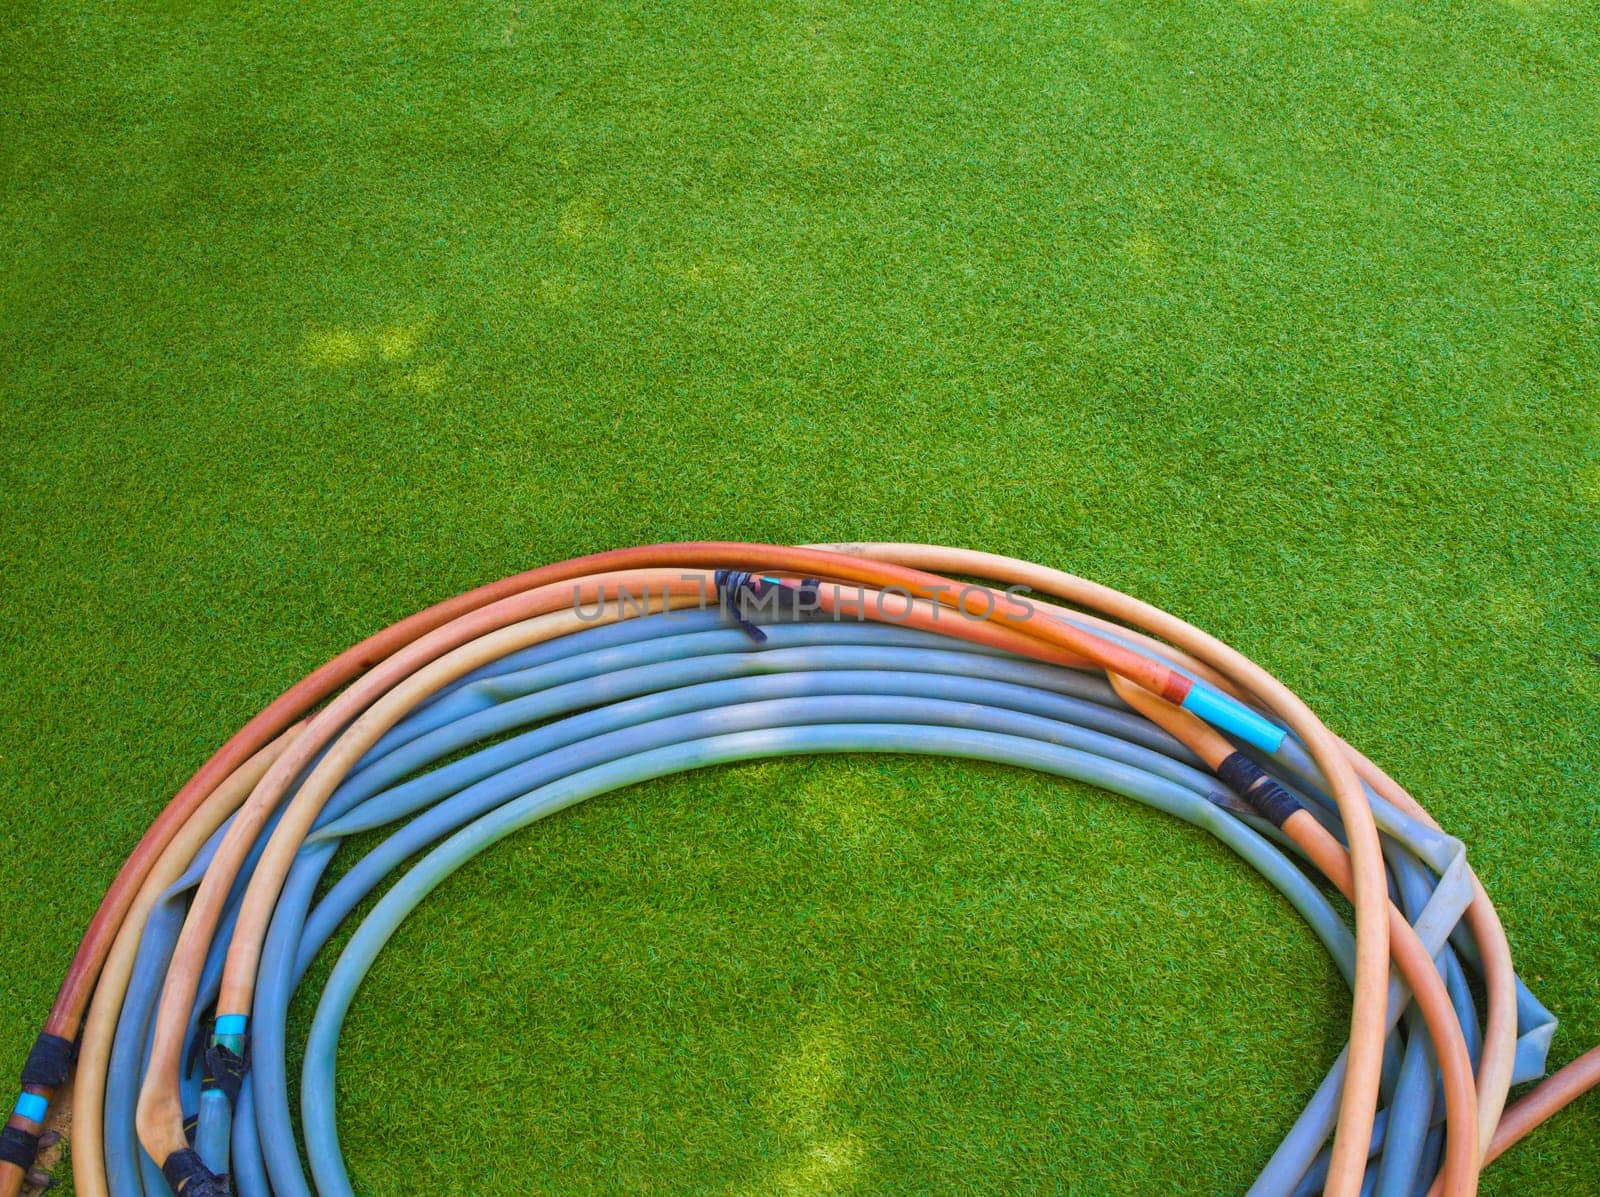 The old Rubber hose on Artificial grass by Satakorn